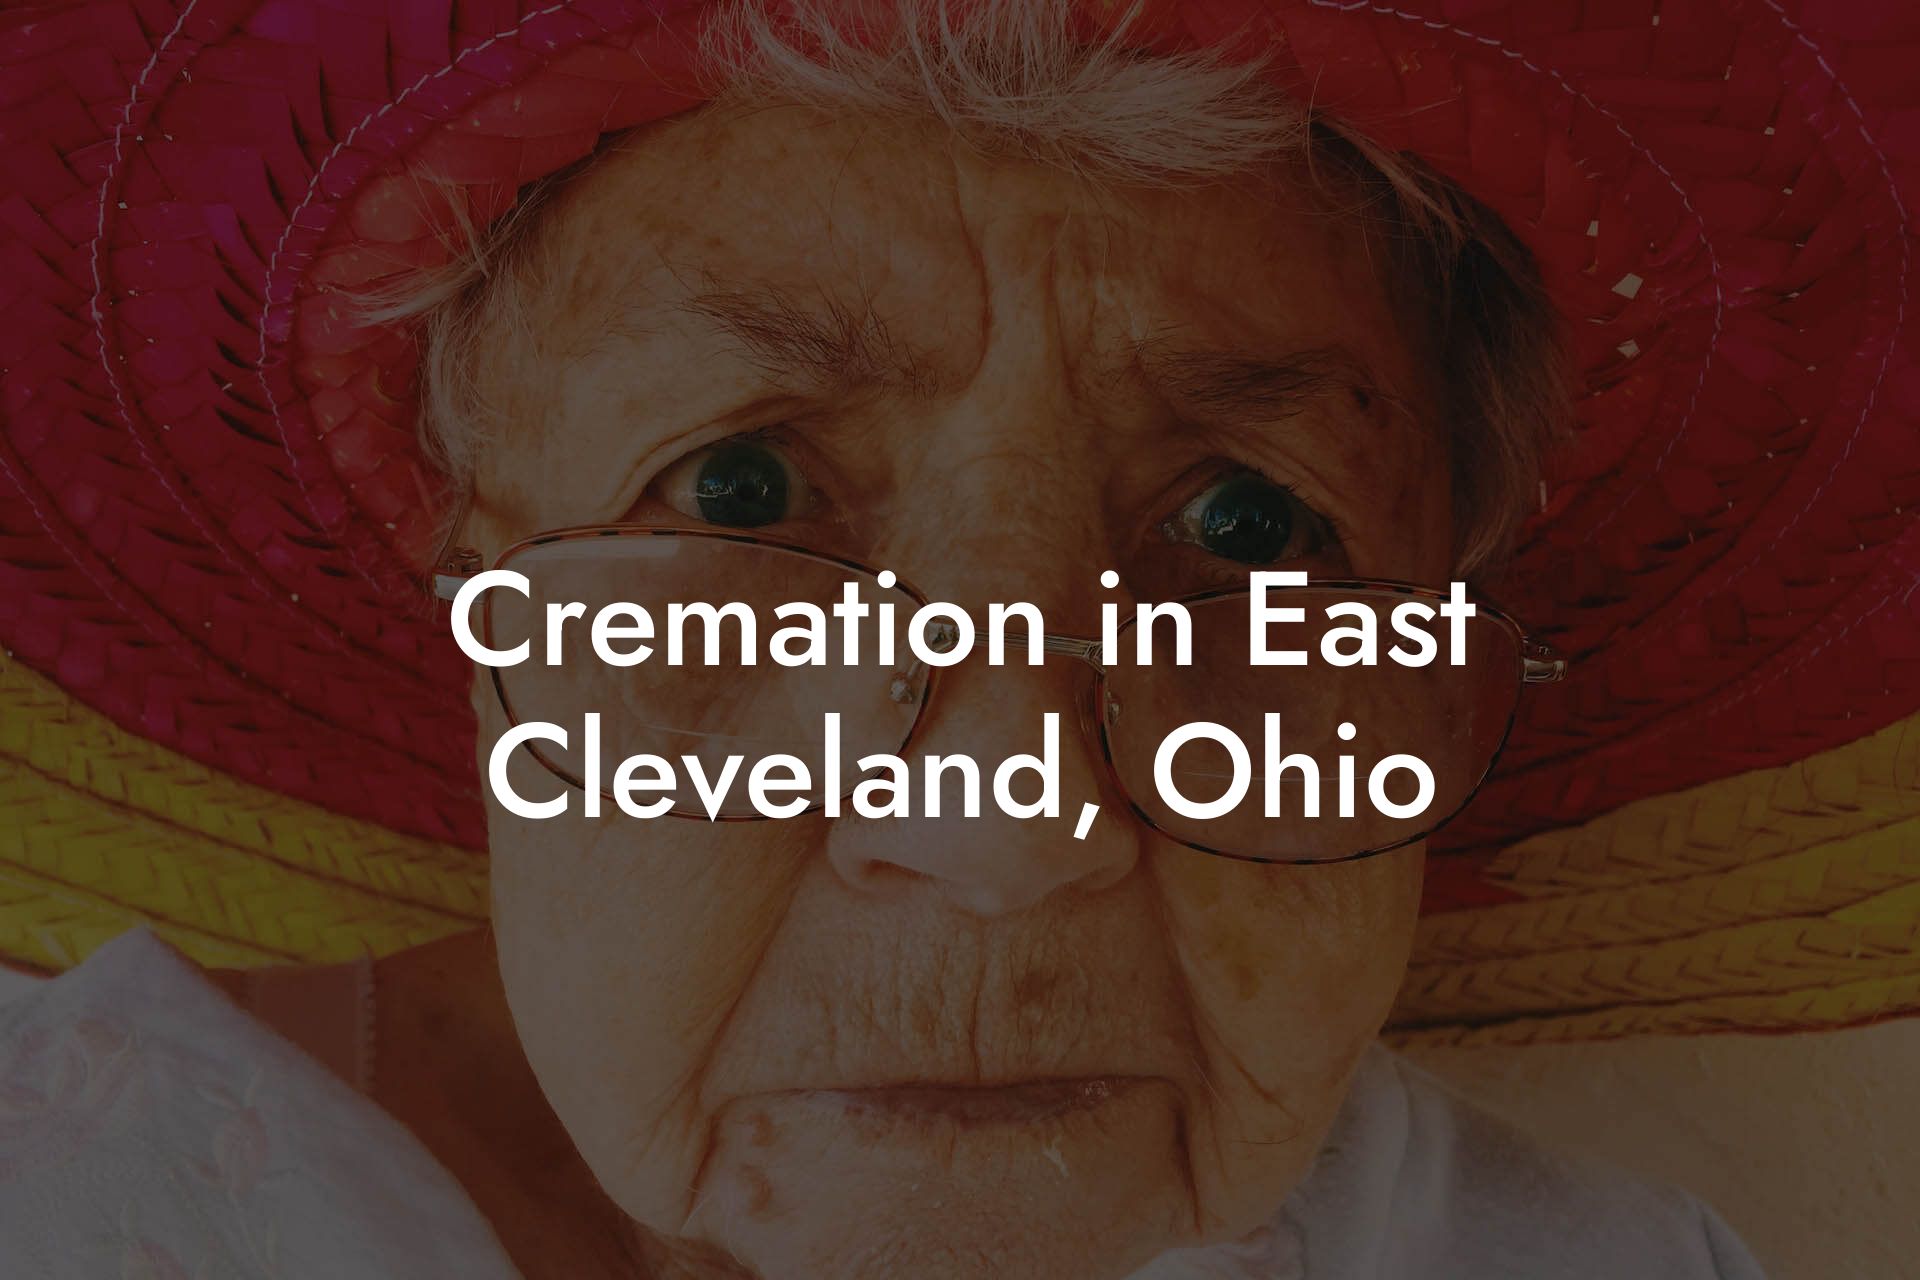 Cremation in East Cleveland, Ohio